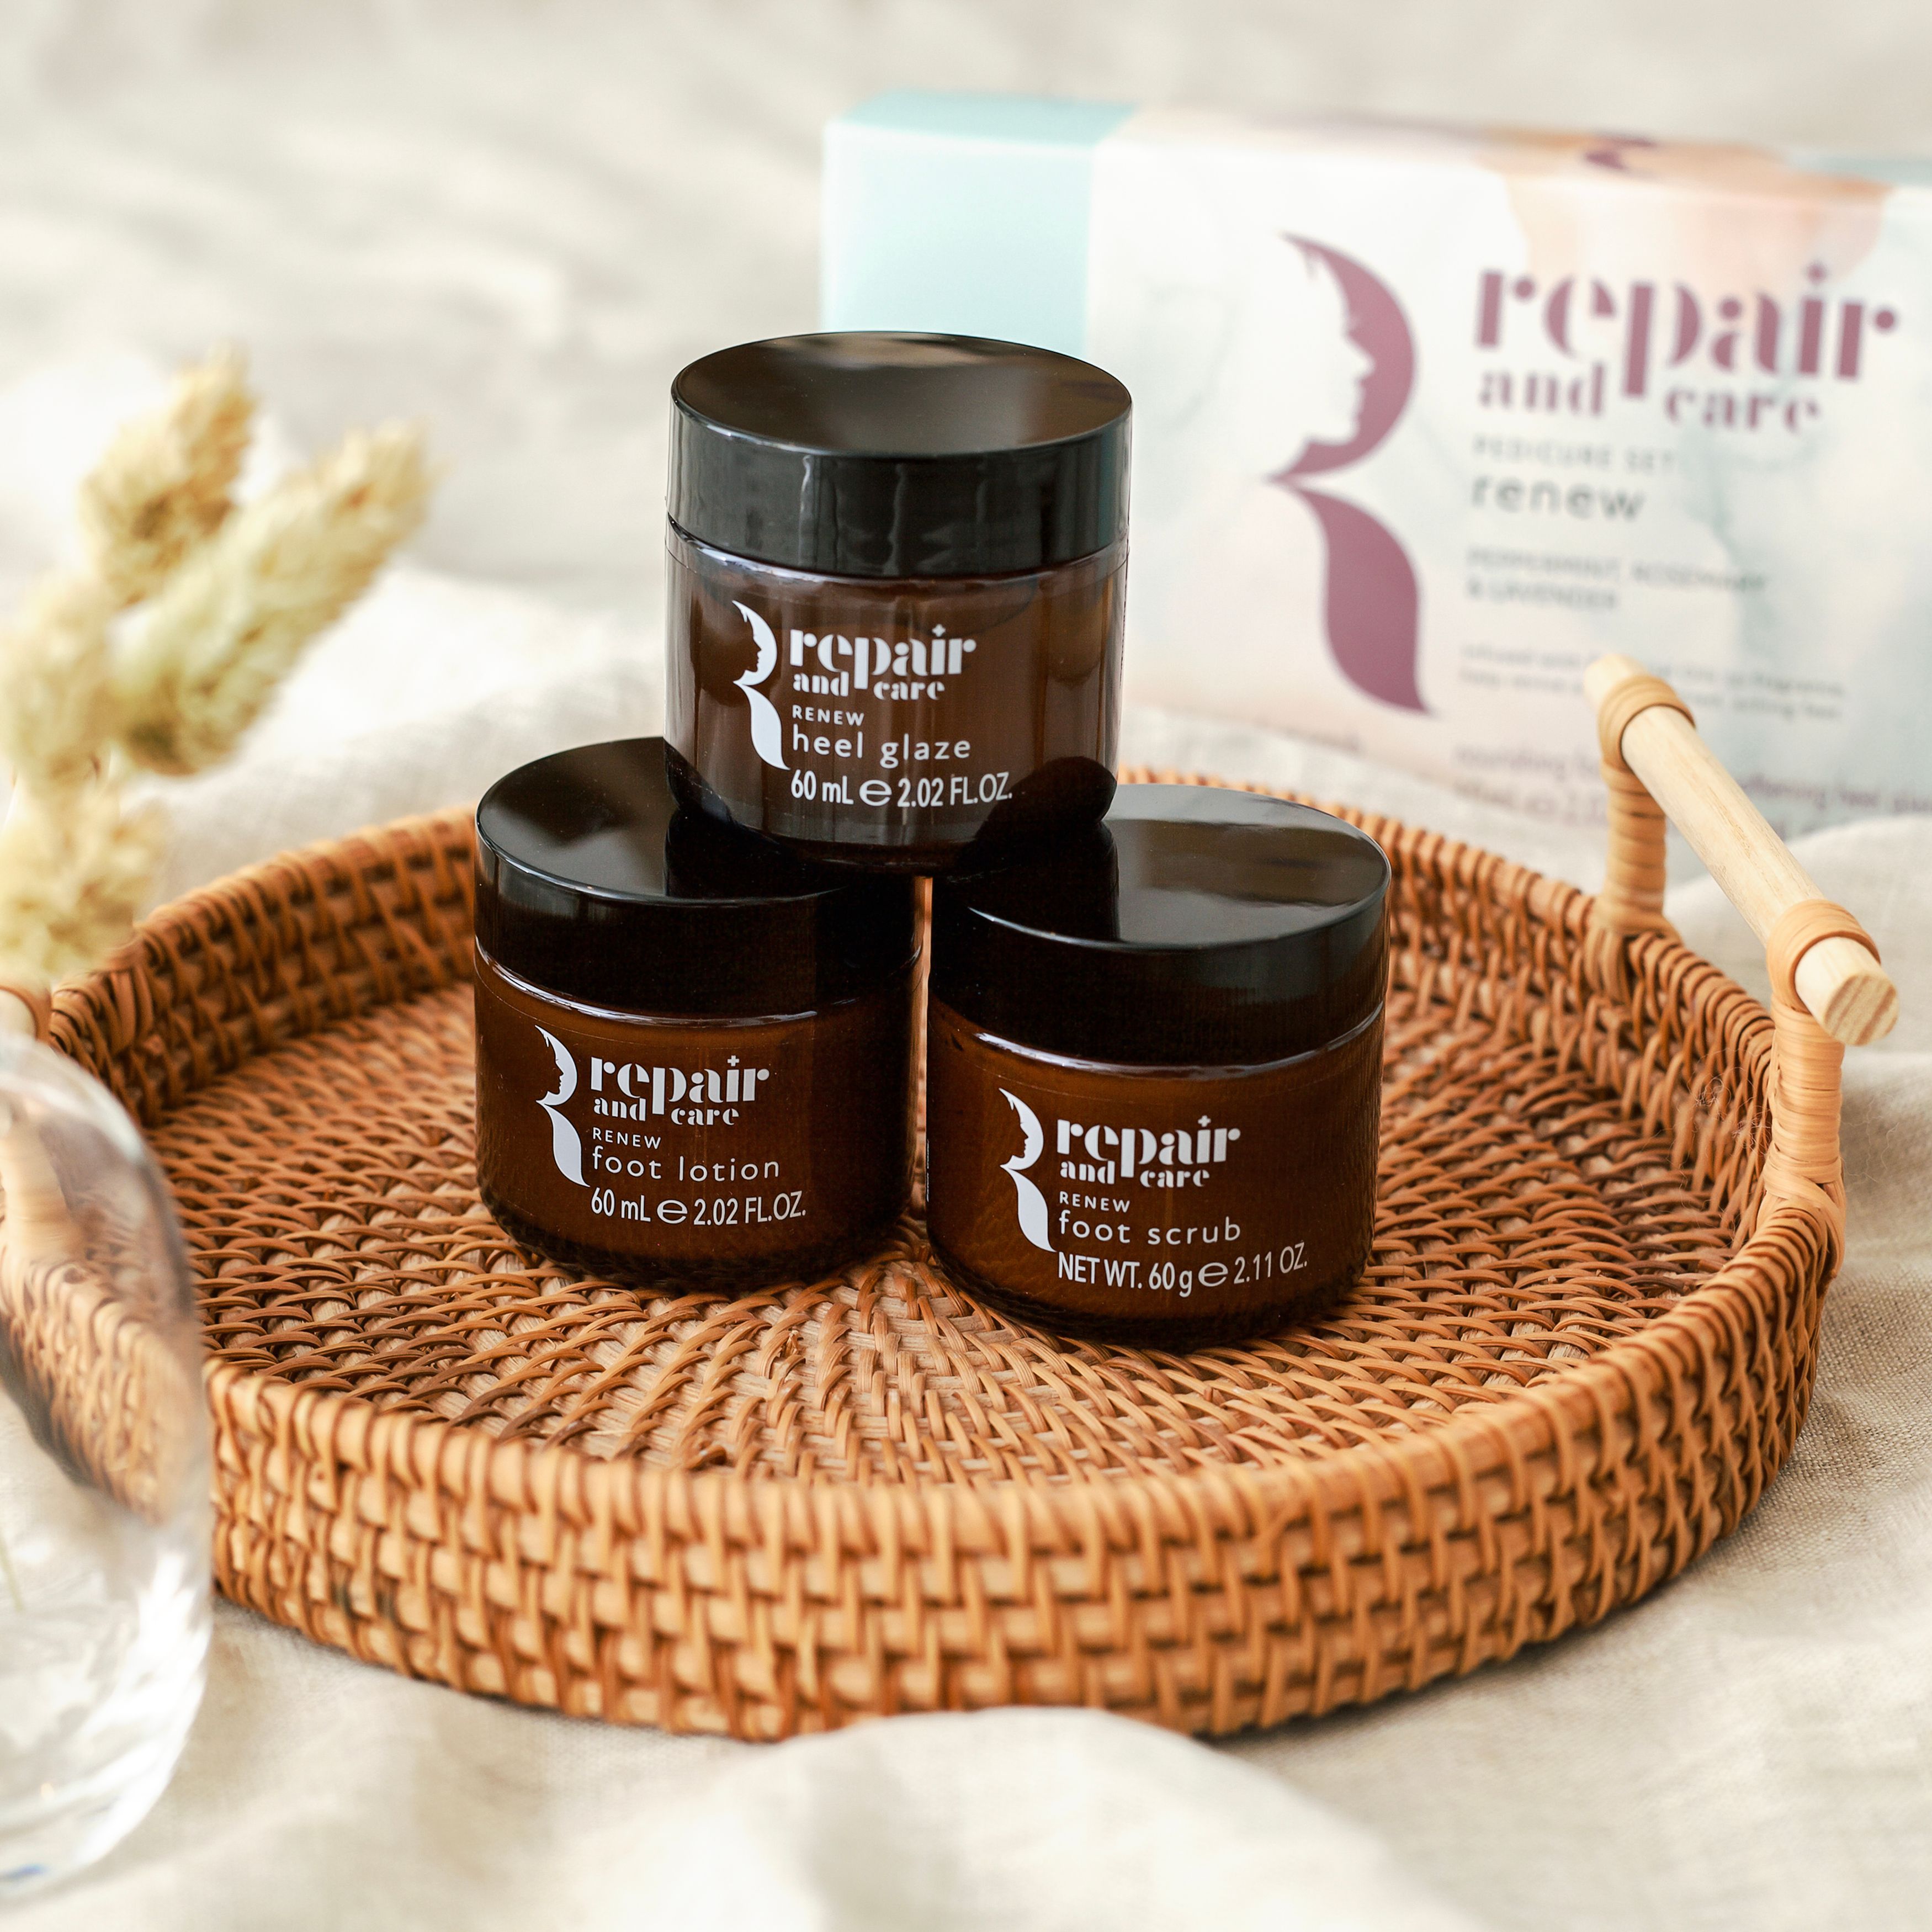 The Somerset Toiletry Co. launch collection to ‘Repair’ body & mind